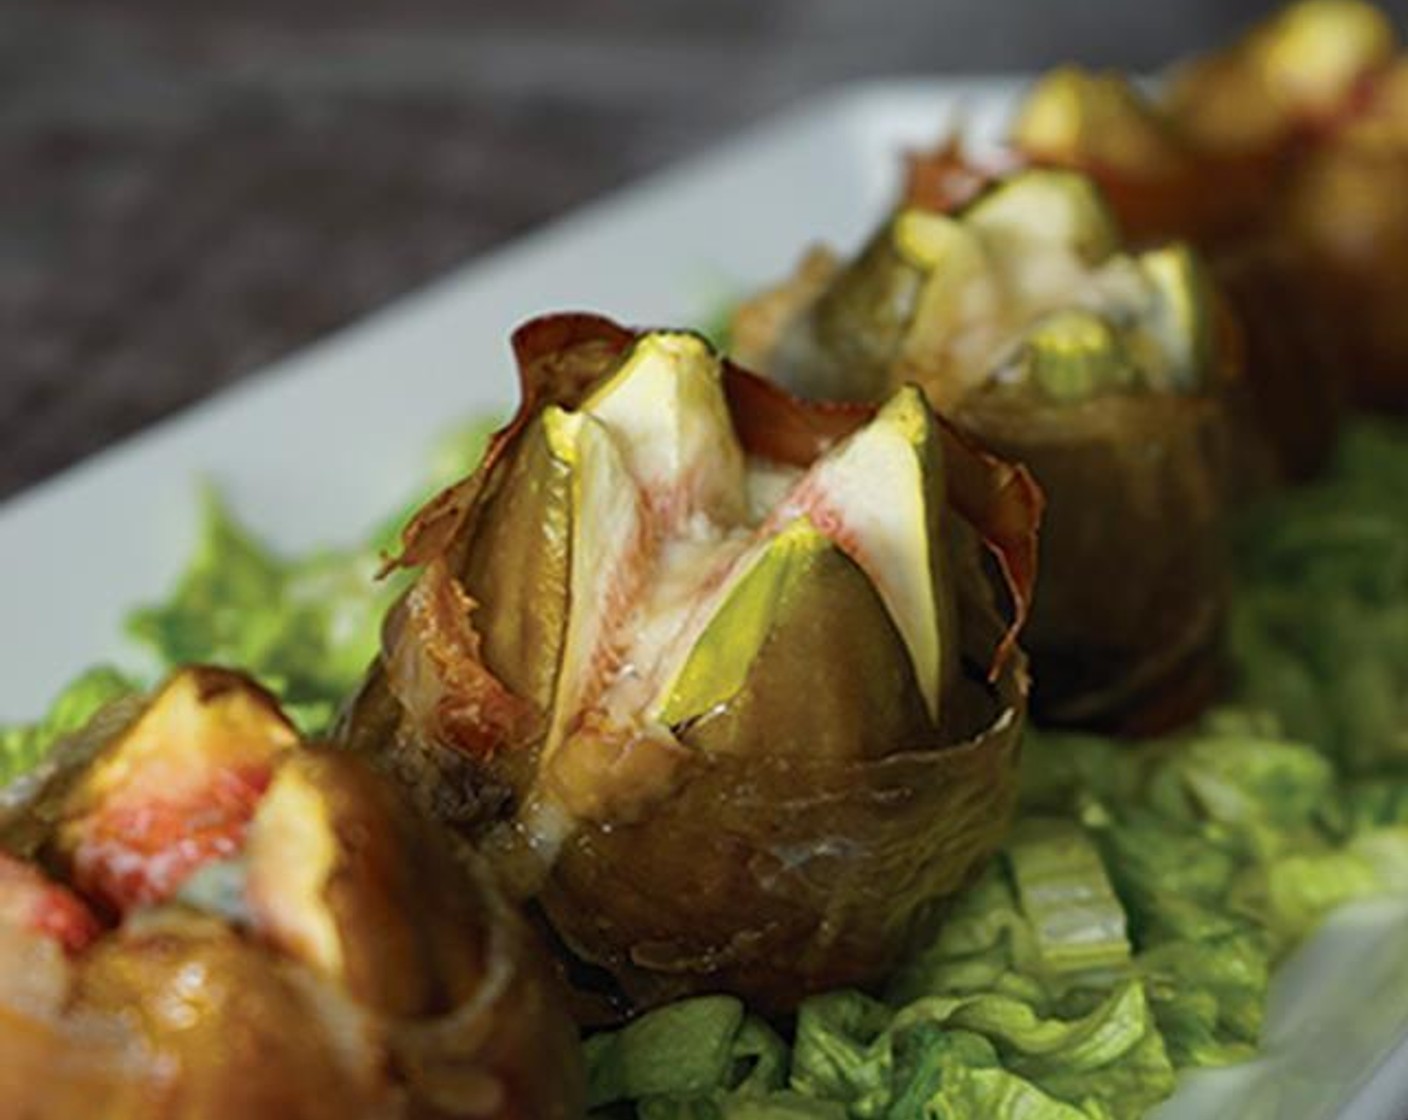 Baked Figs Wrapped in Prosciutto and Gorgonzola